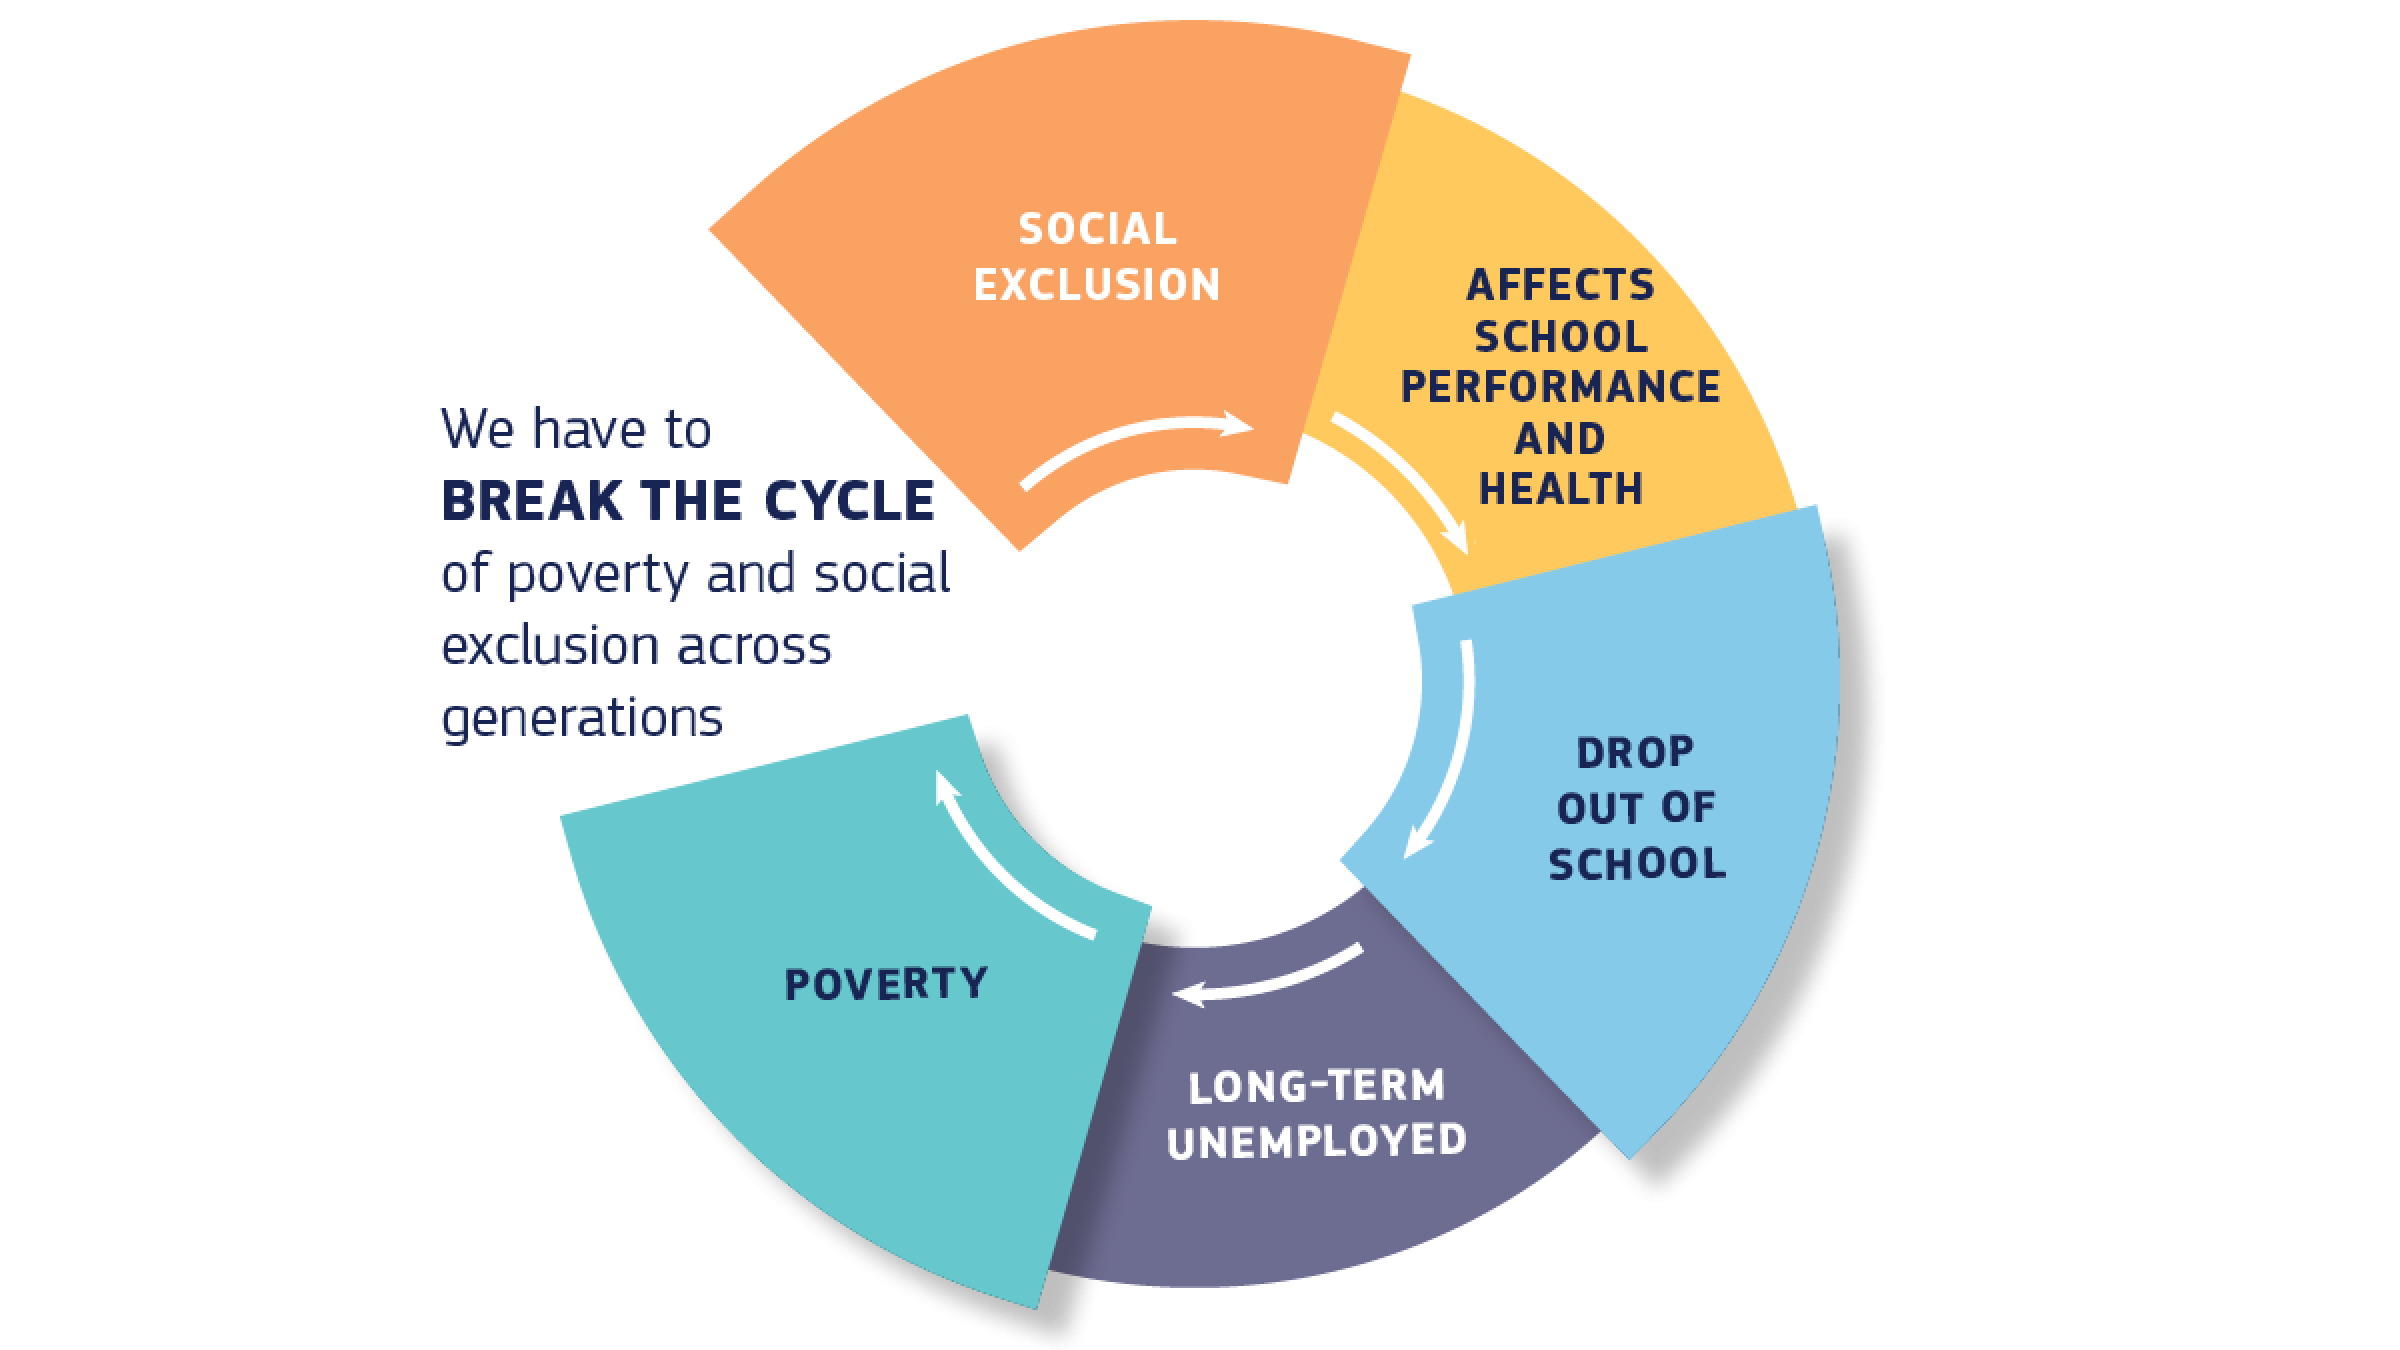 We have to break the cycle of poverty and social exclusion